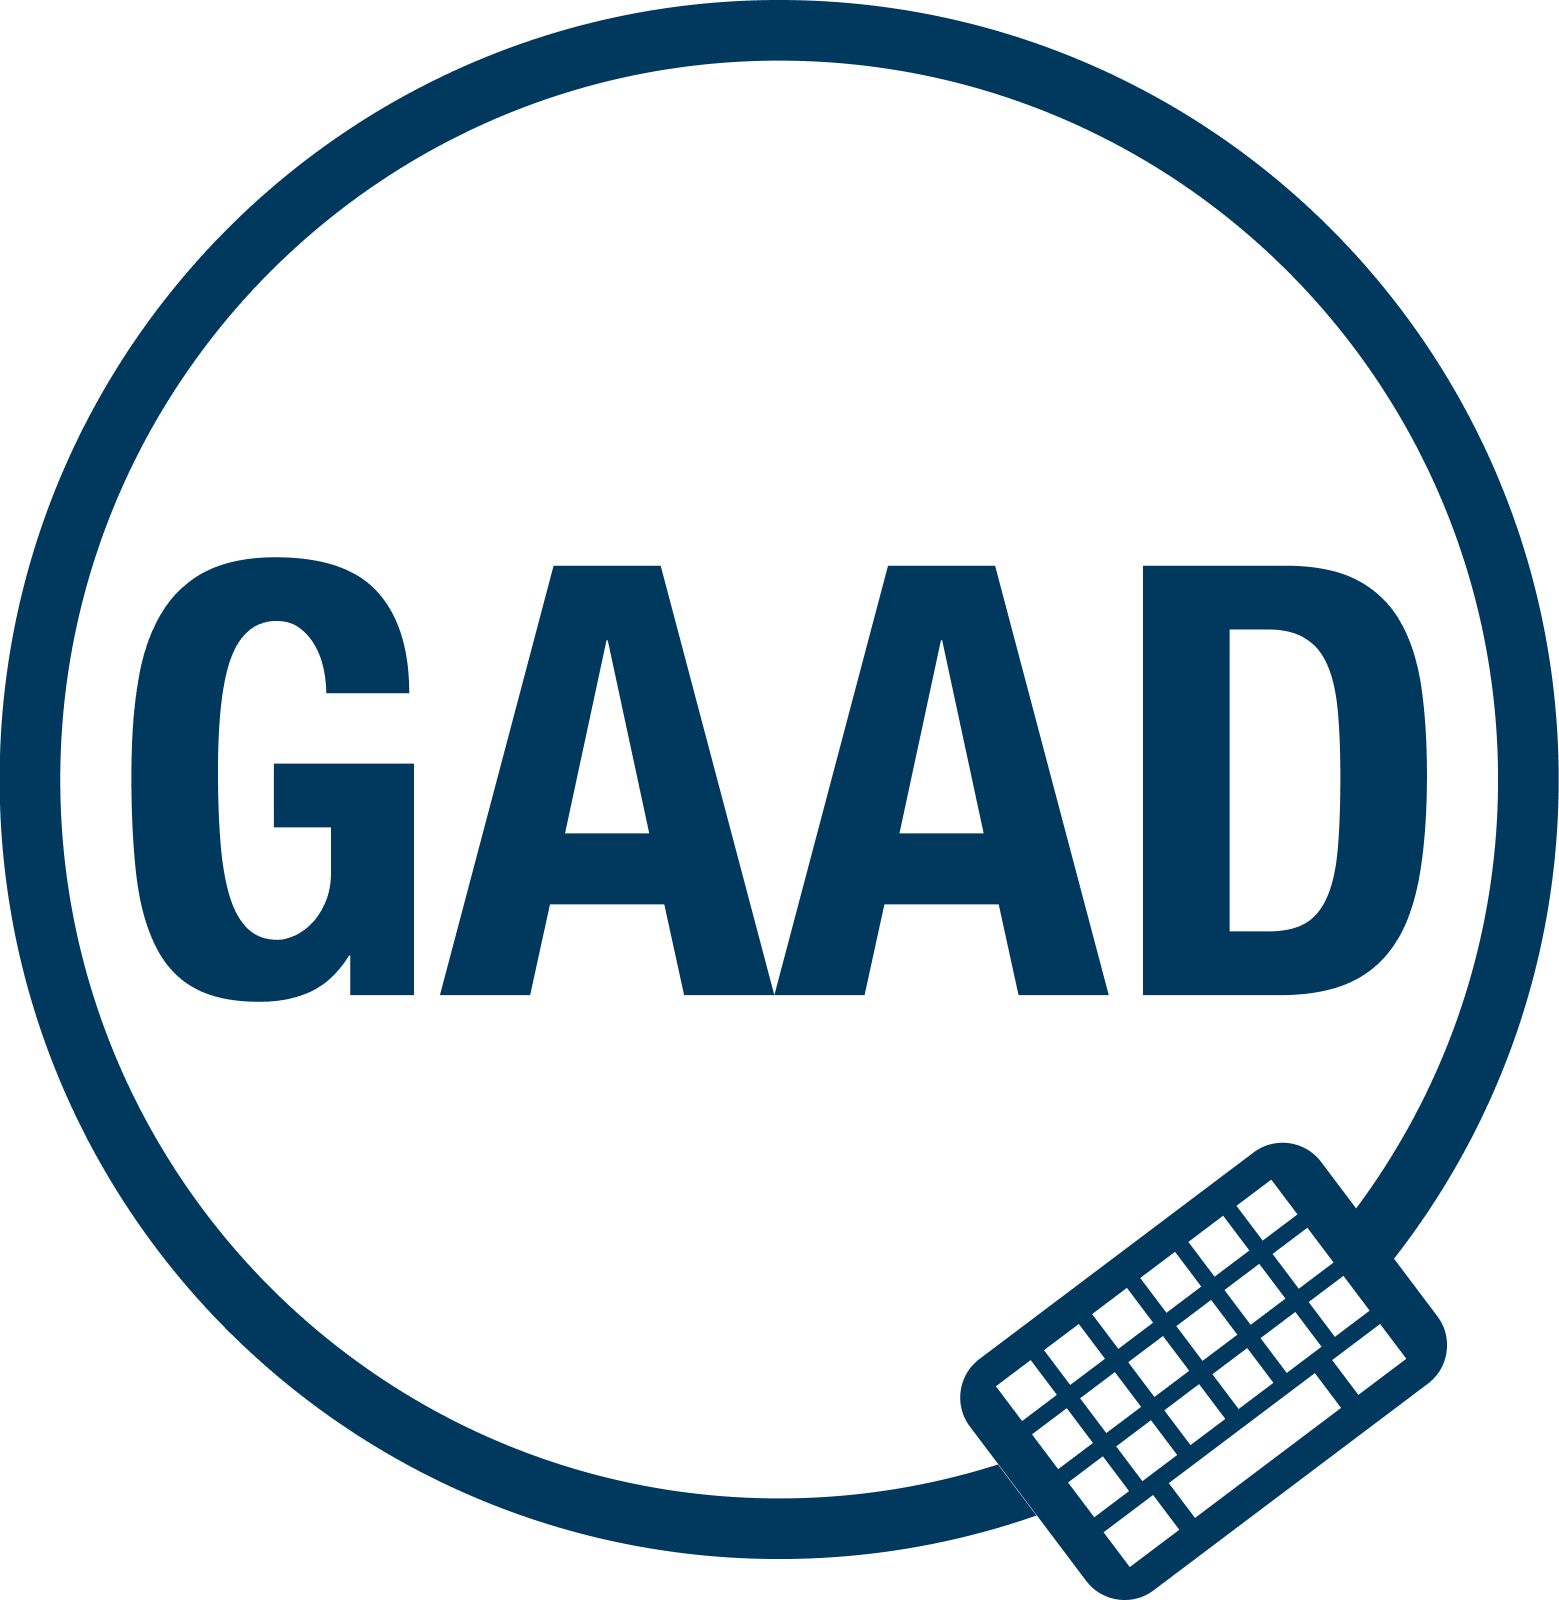 GAAD Foundation Logo - blue on a white background. A circle with a keyboard on the bottom-right encompasses the letters GAAD.